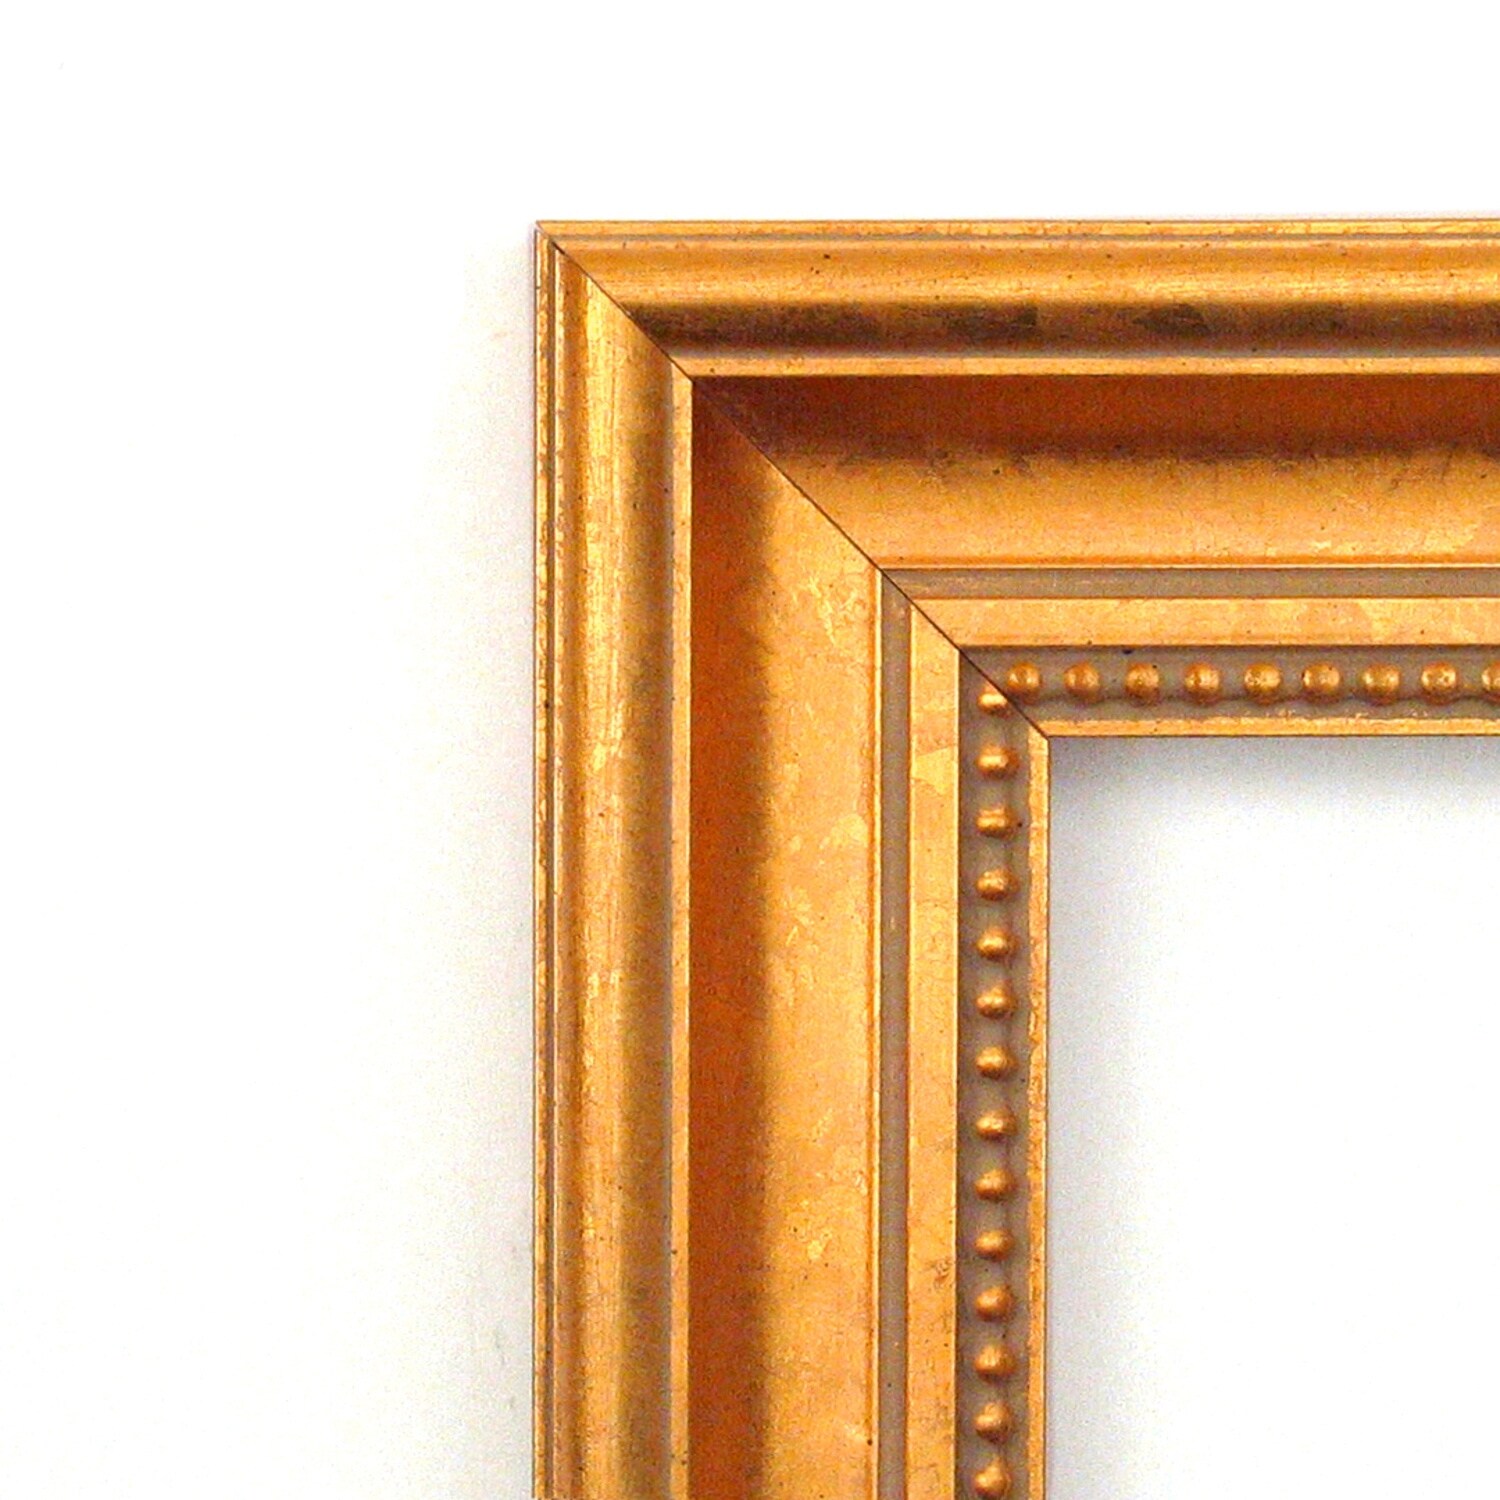 CustomPictureFrames.com 44x24 Frame Gold Real Wood Picture Frame Width 1.25 Inches | Interior Frame Depth 0.5 Inches | Garrin Gold Traditional Photo